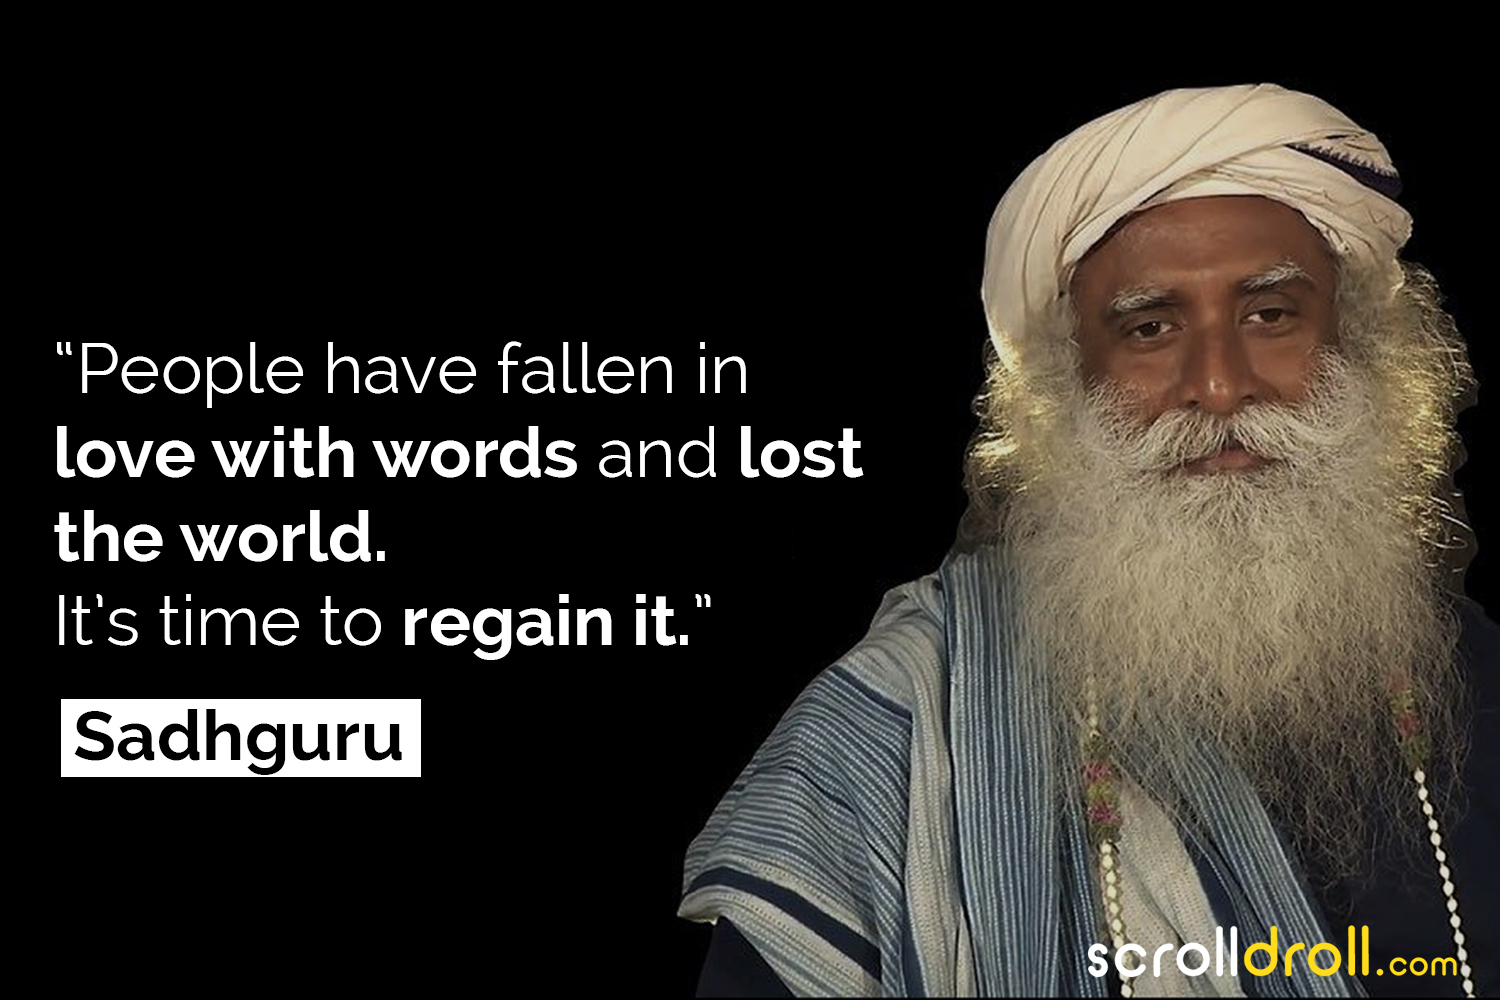 Sadhguru-Quotes-14 - The Best of Indian Pop Culture & What's ...